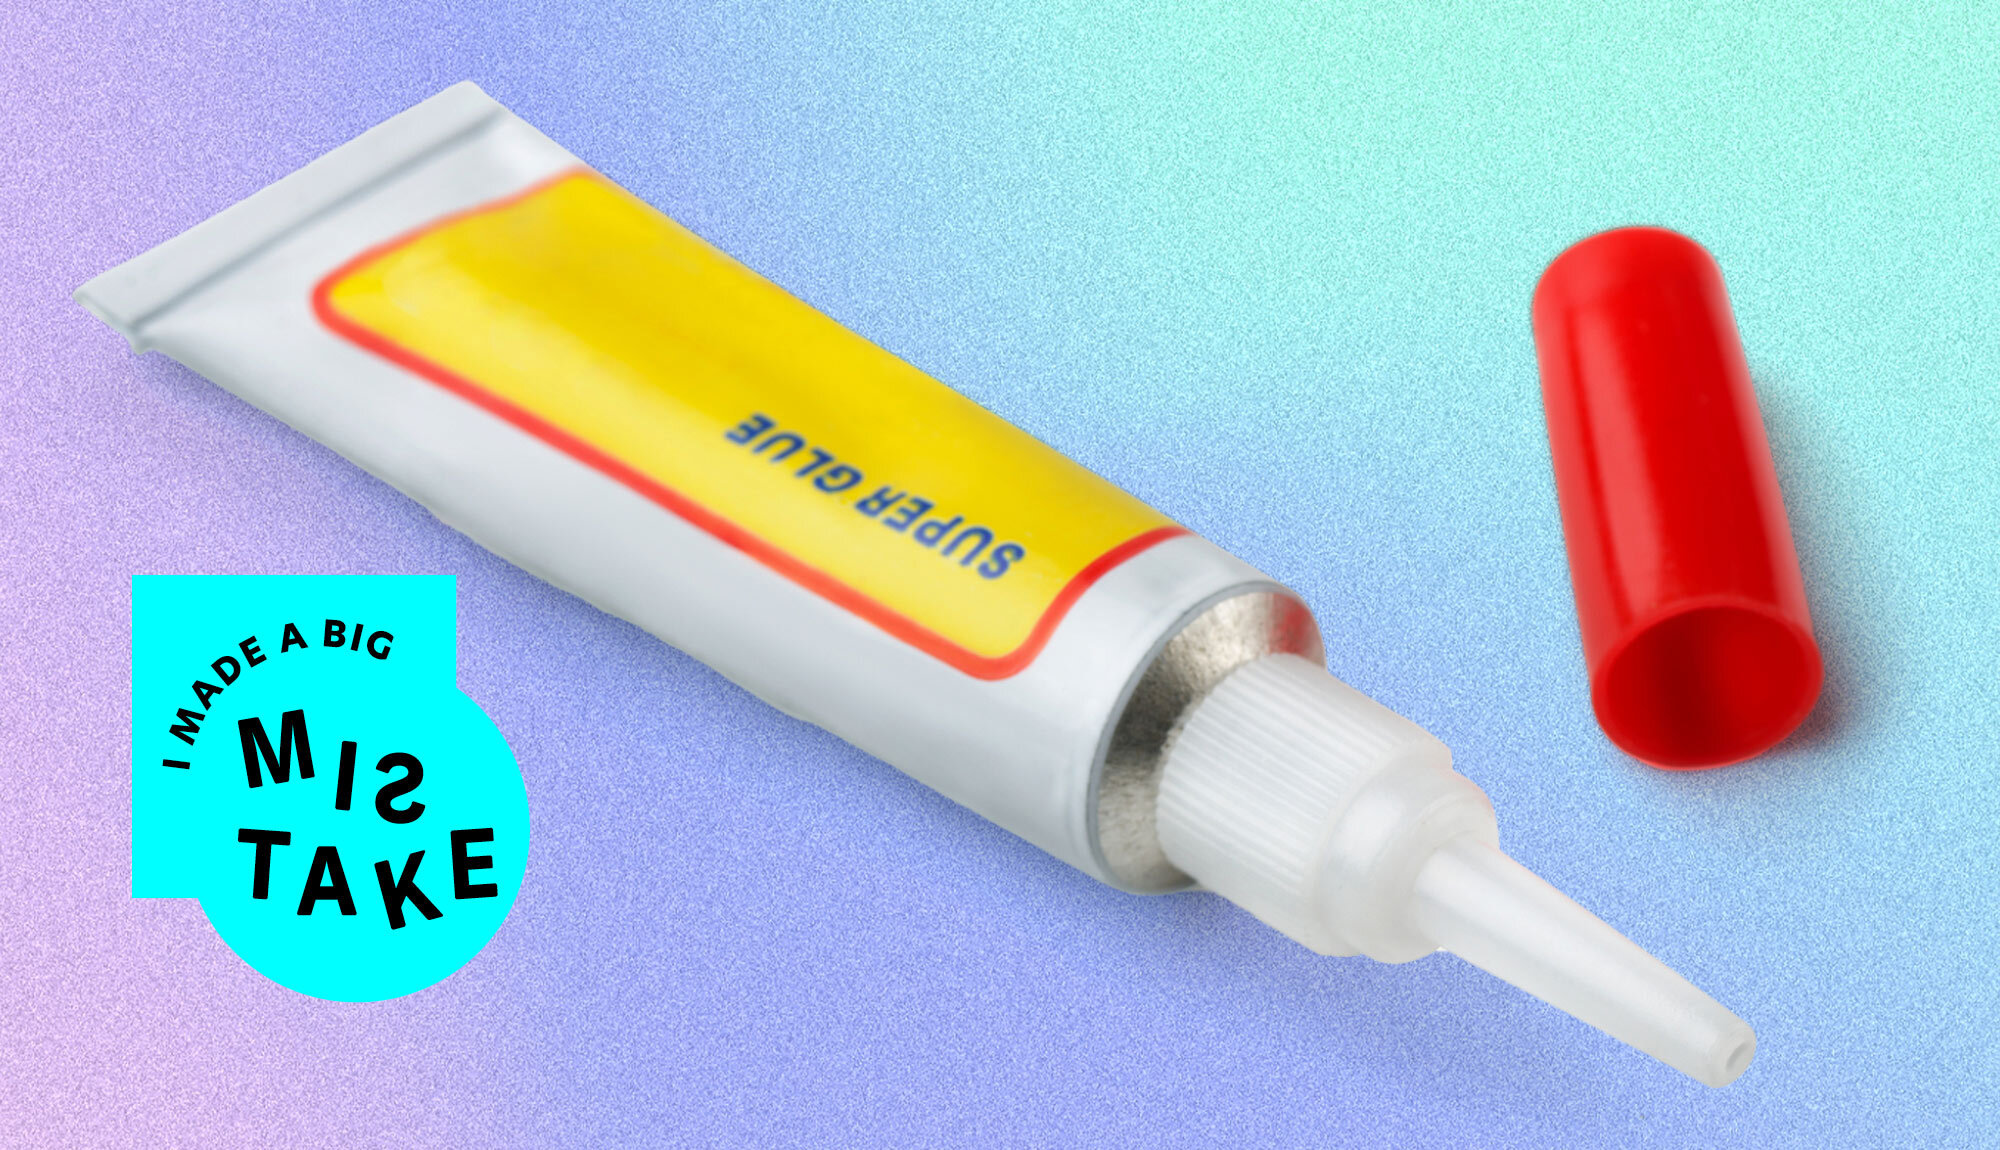 How World War II led to the invention of super glue